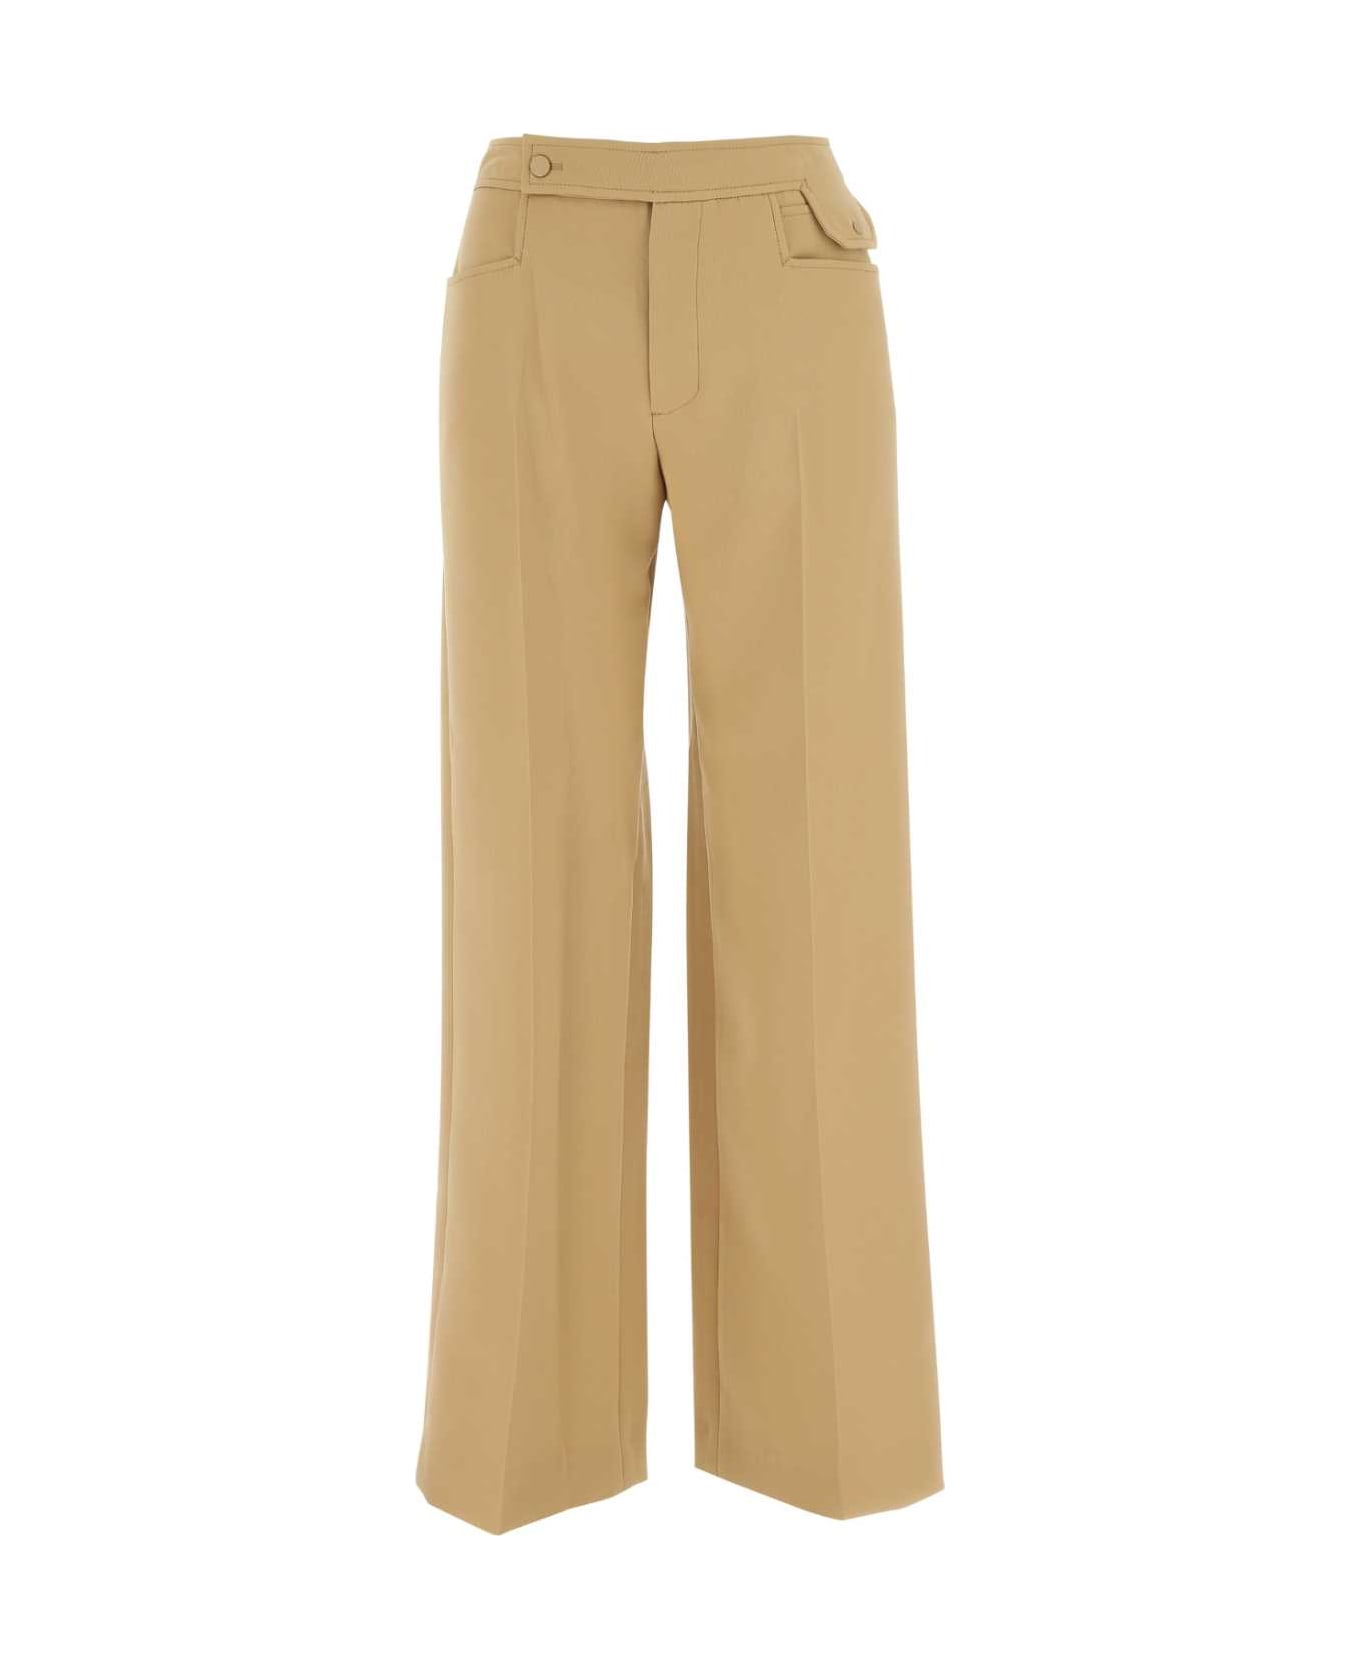 Low Classic Camel Polyester Wide-leg Pant - 0269